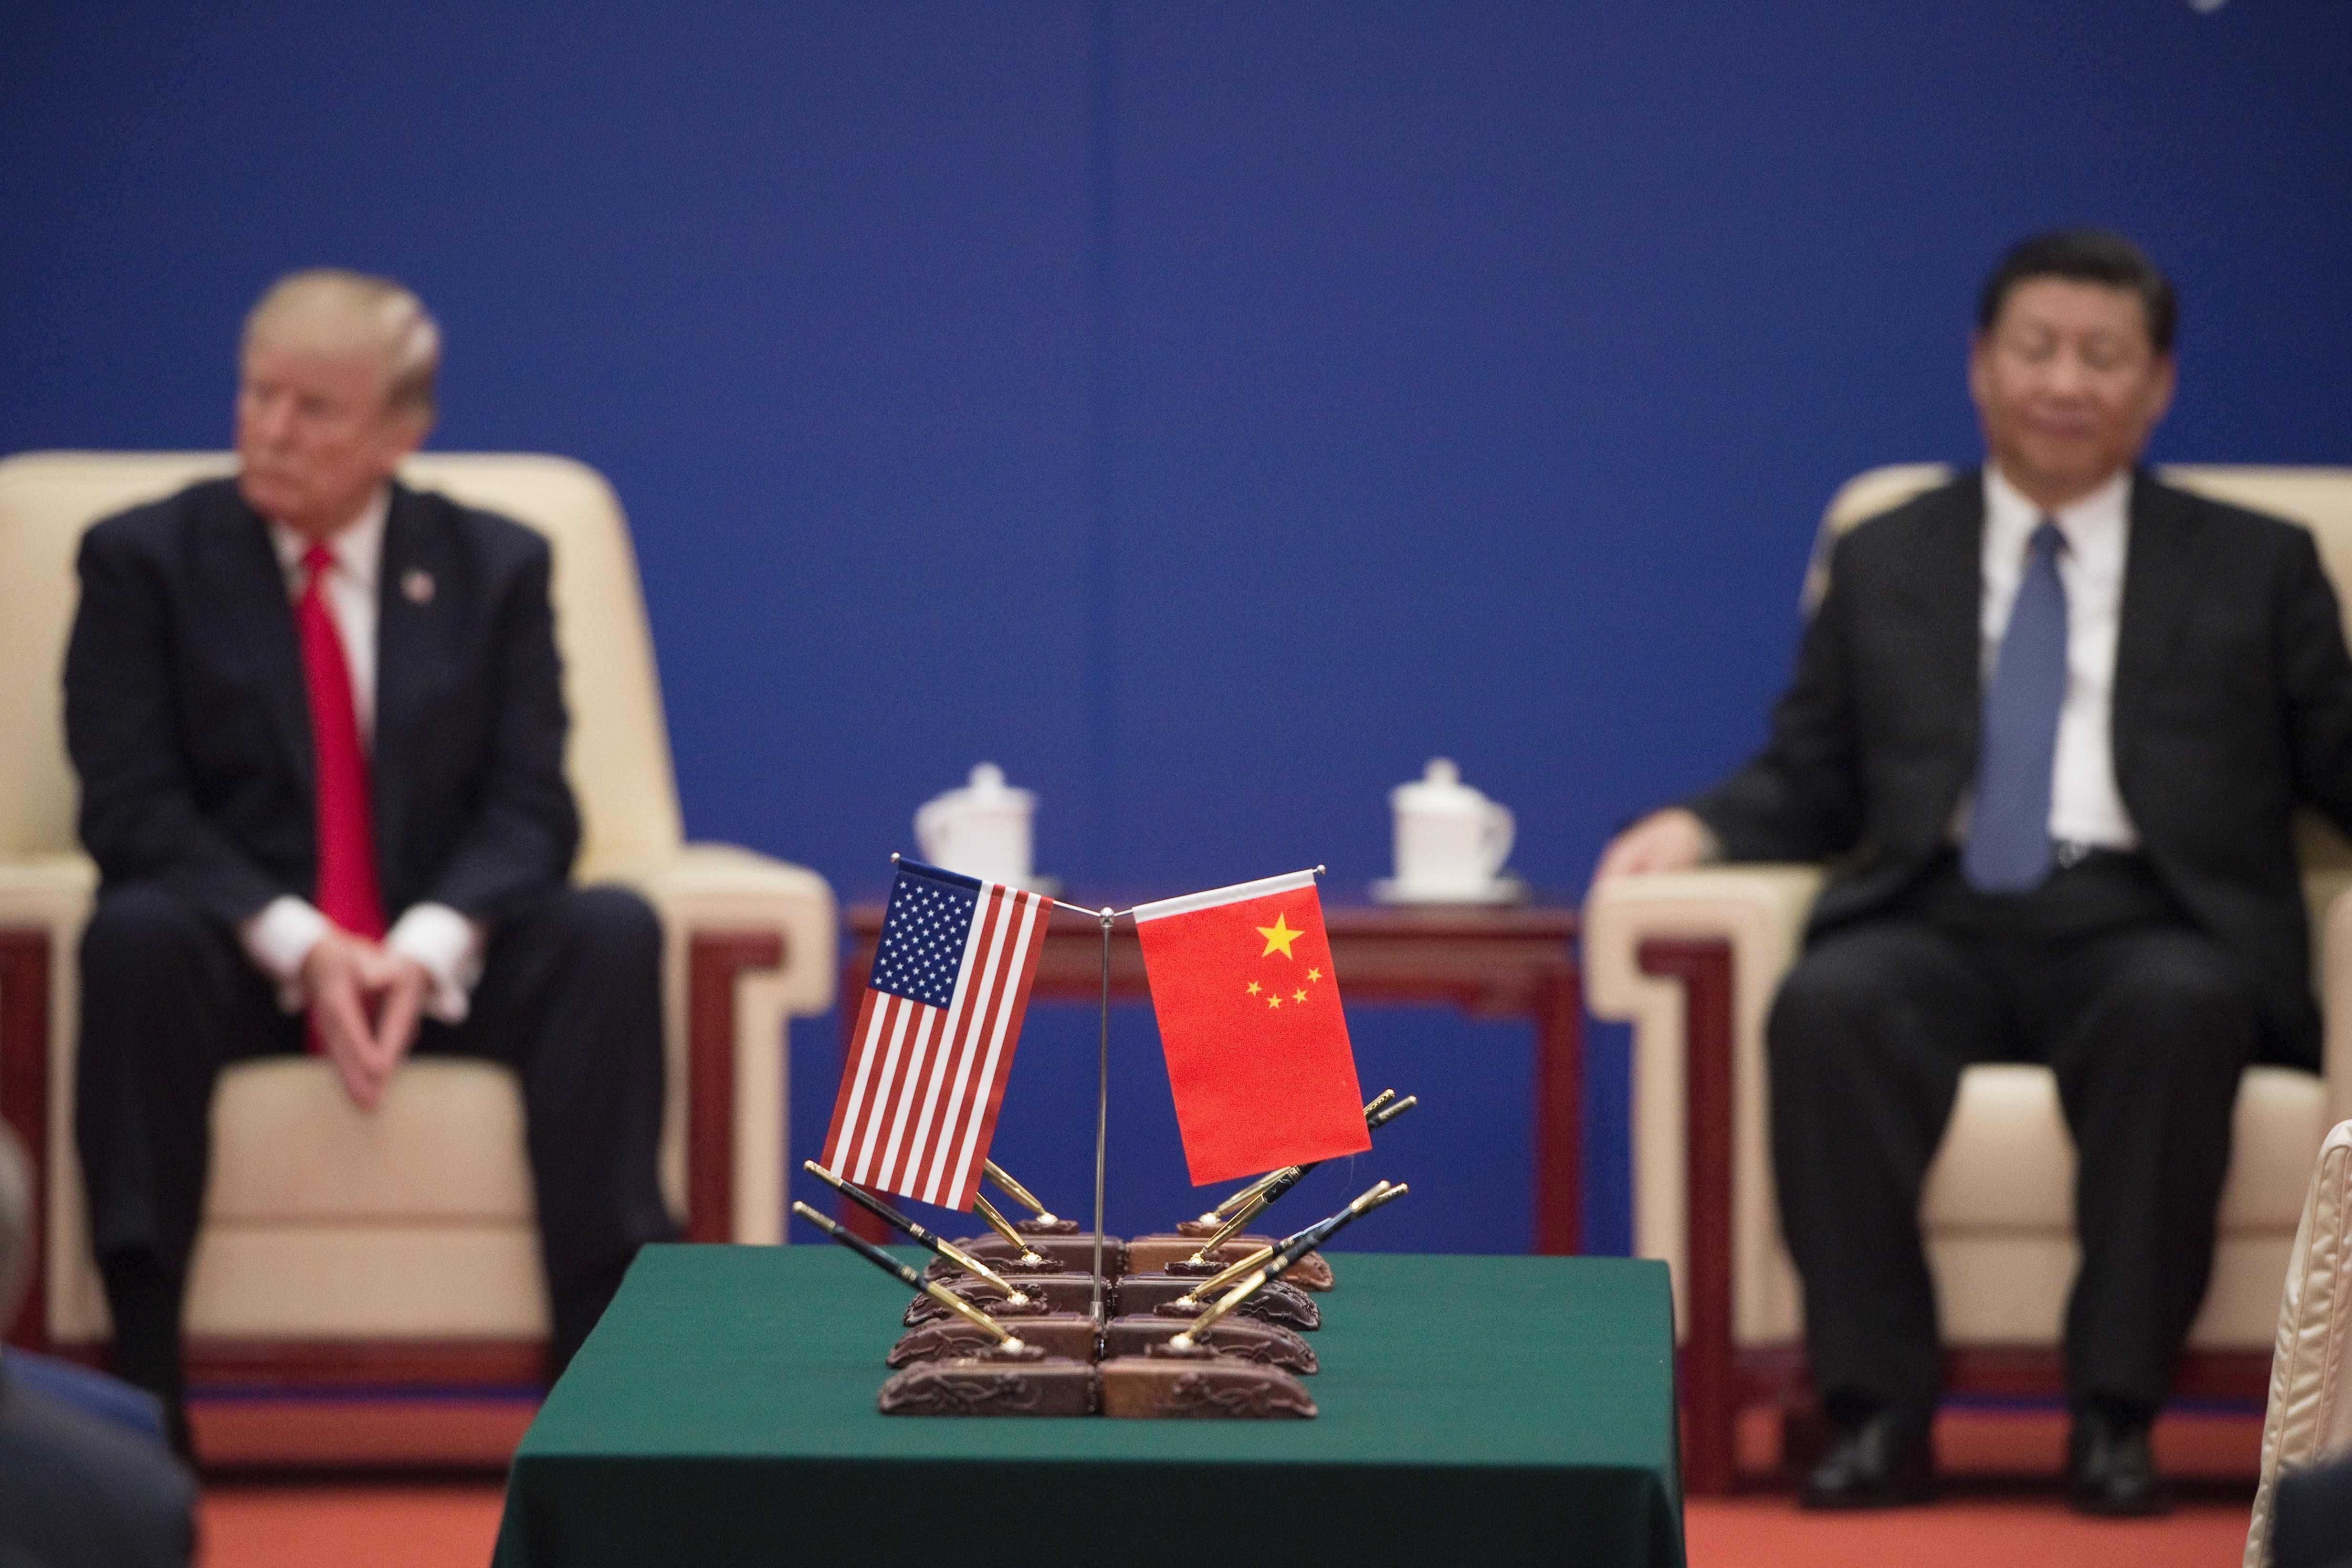 Donald Trump has sung the praises of the “deal” the US and China have struck, but nothing has been signed as of yet and the two countries remain far apart on crucial issues. Photo: AFP